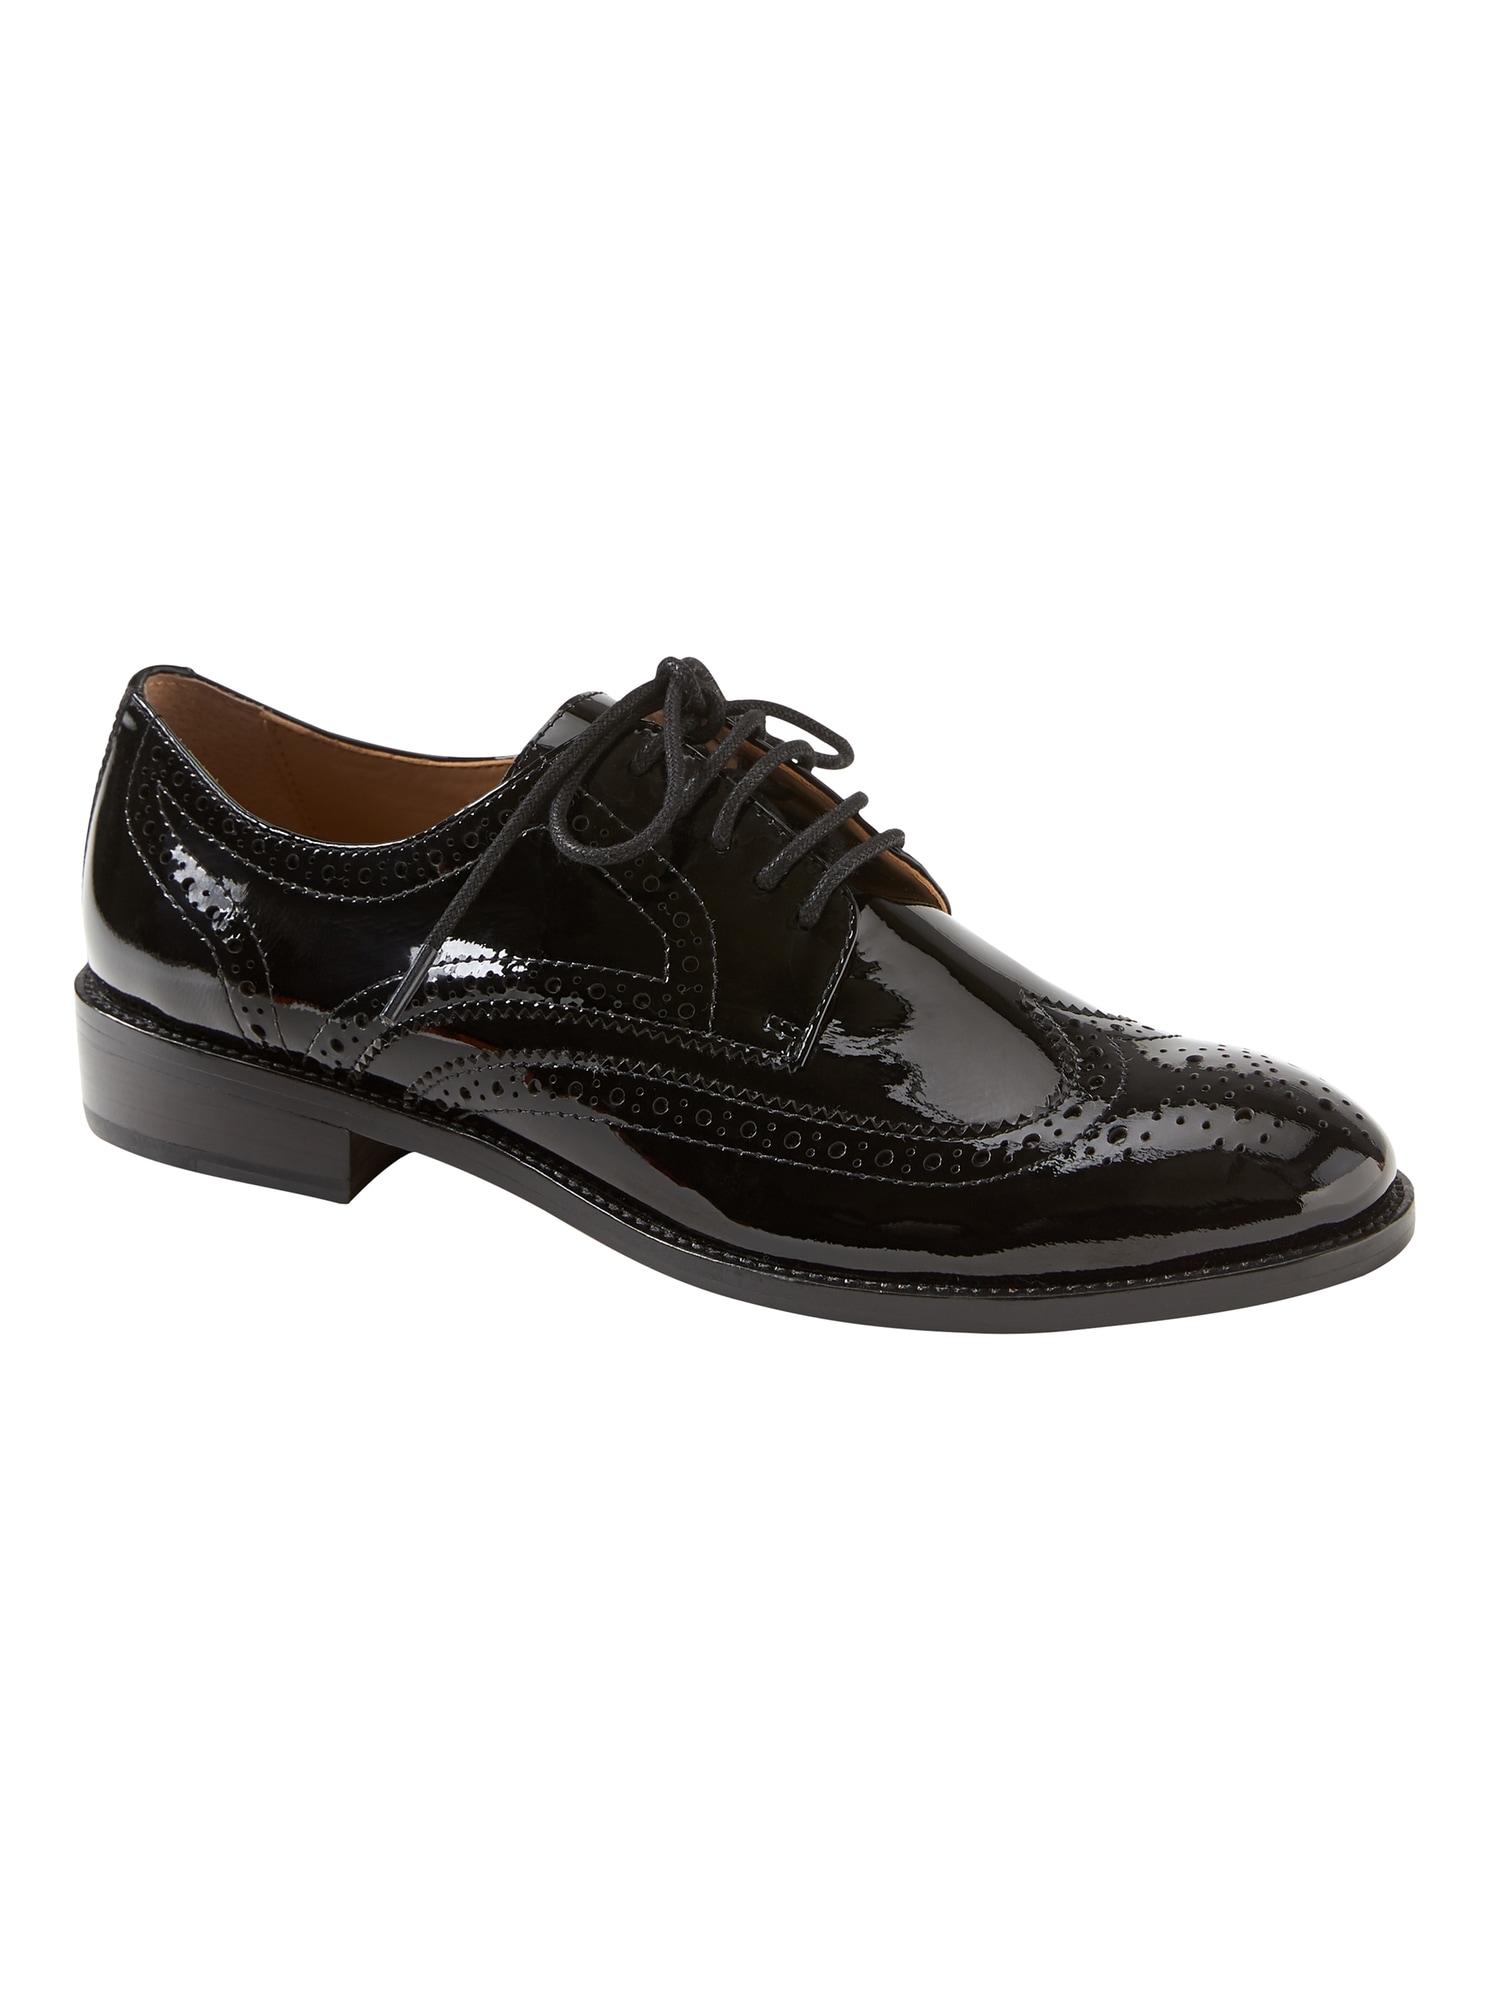 Patent Leather Brogue Oxford